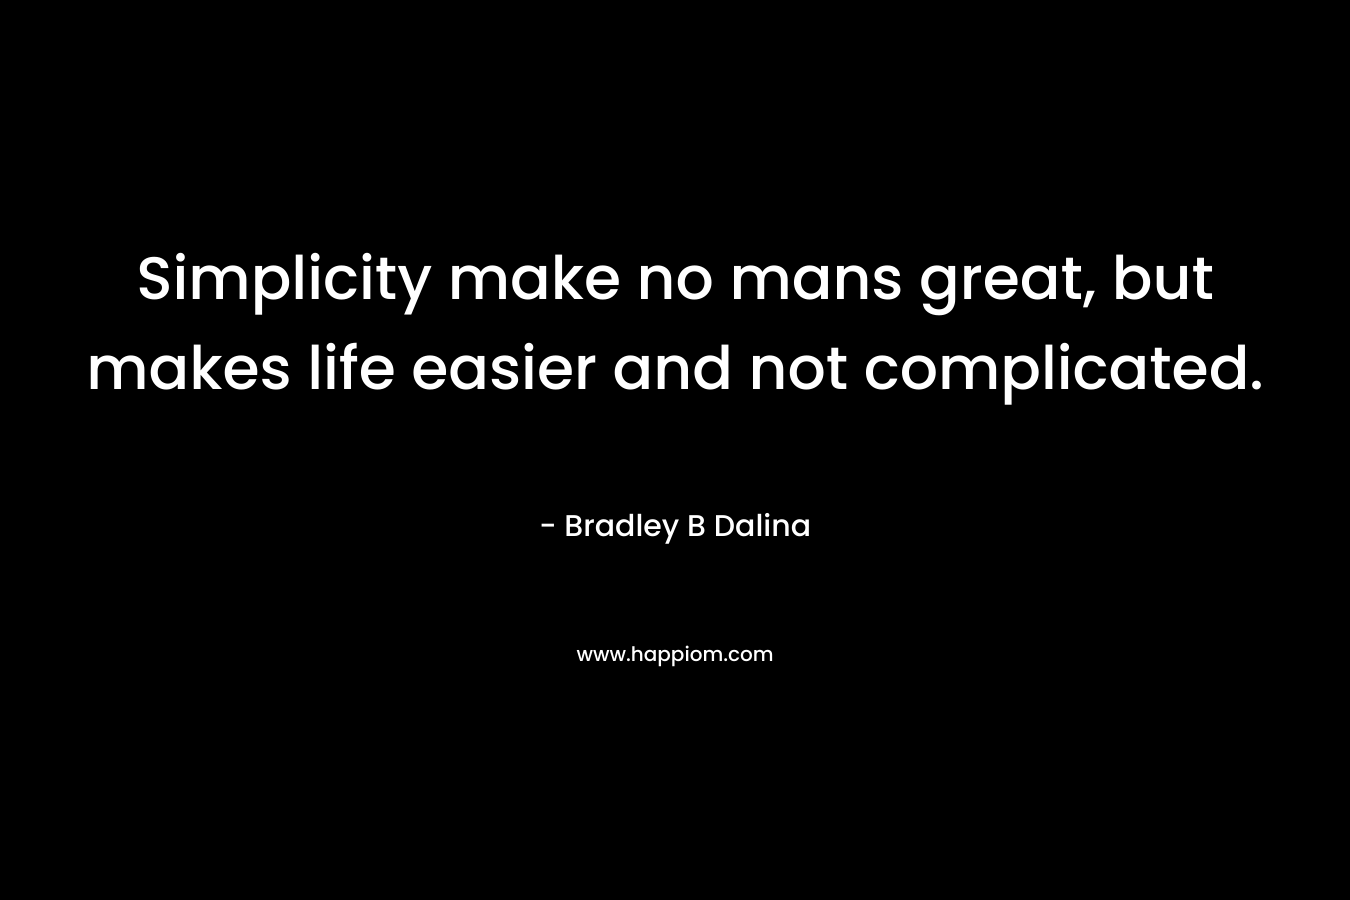 Simplicity make no mans great, but makes life easier and not complicated.